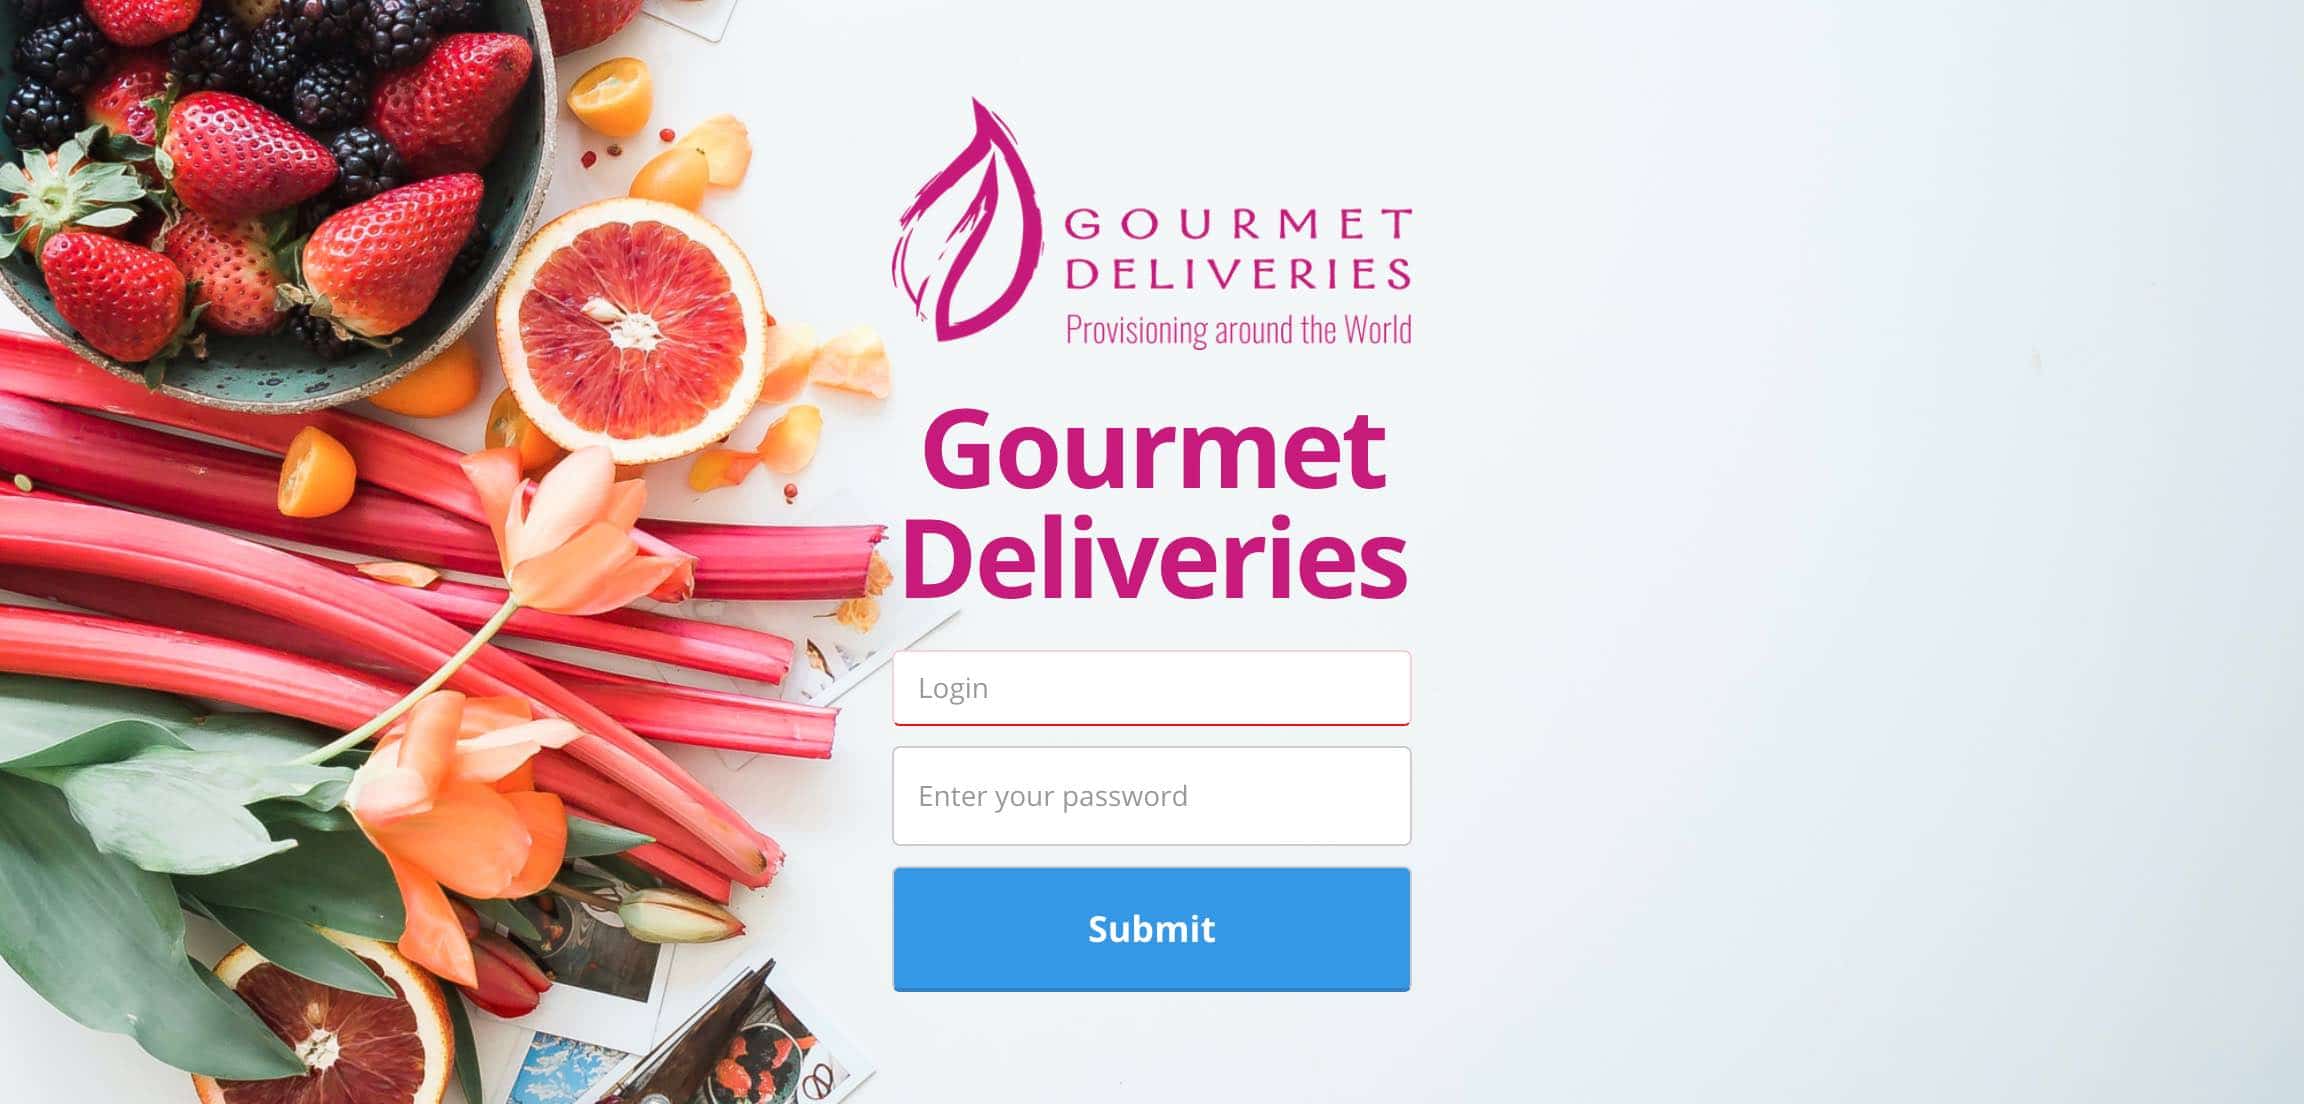 Gourmet Deliveries Login Page